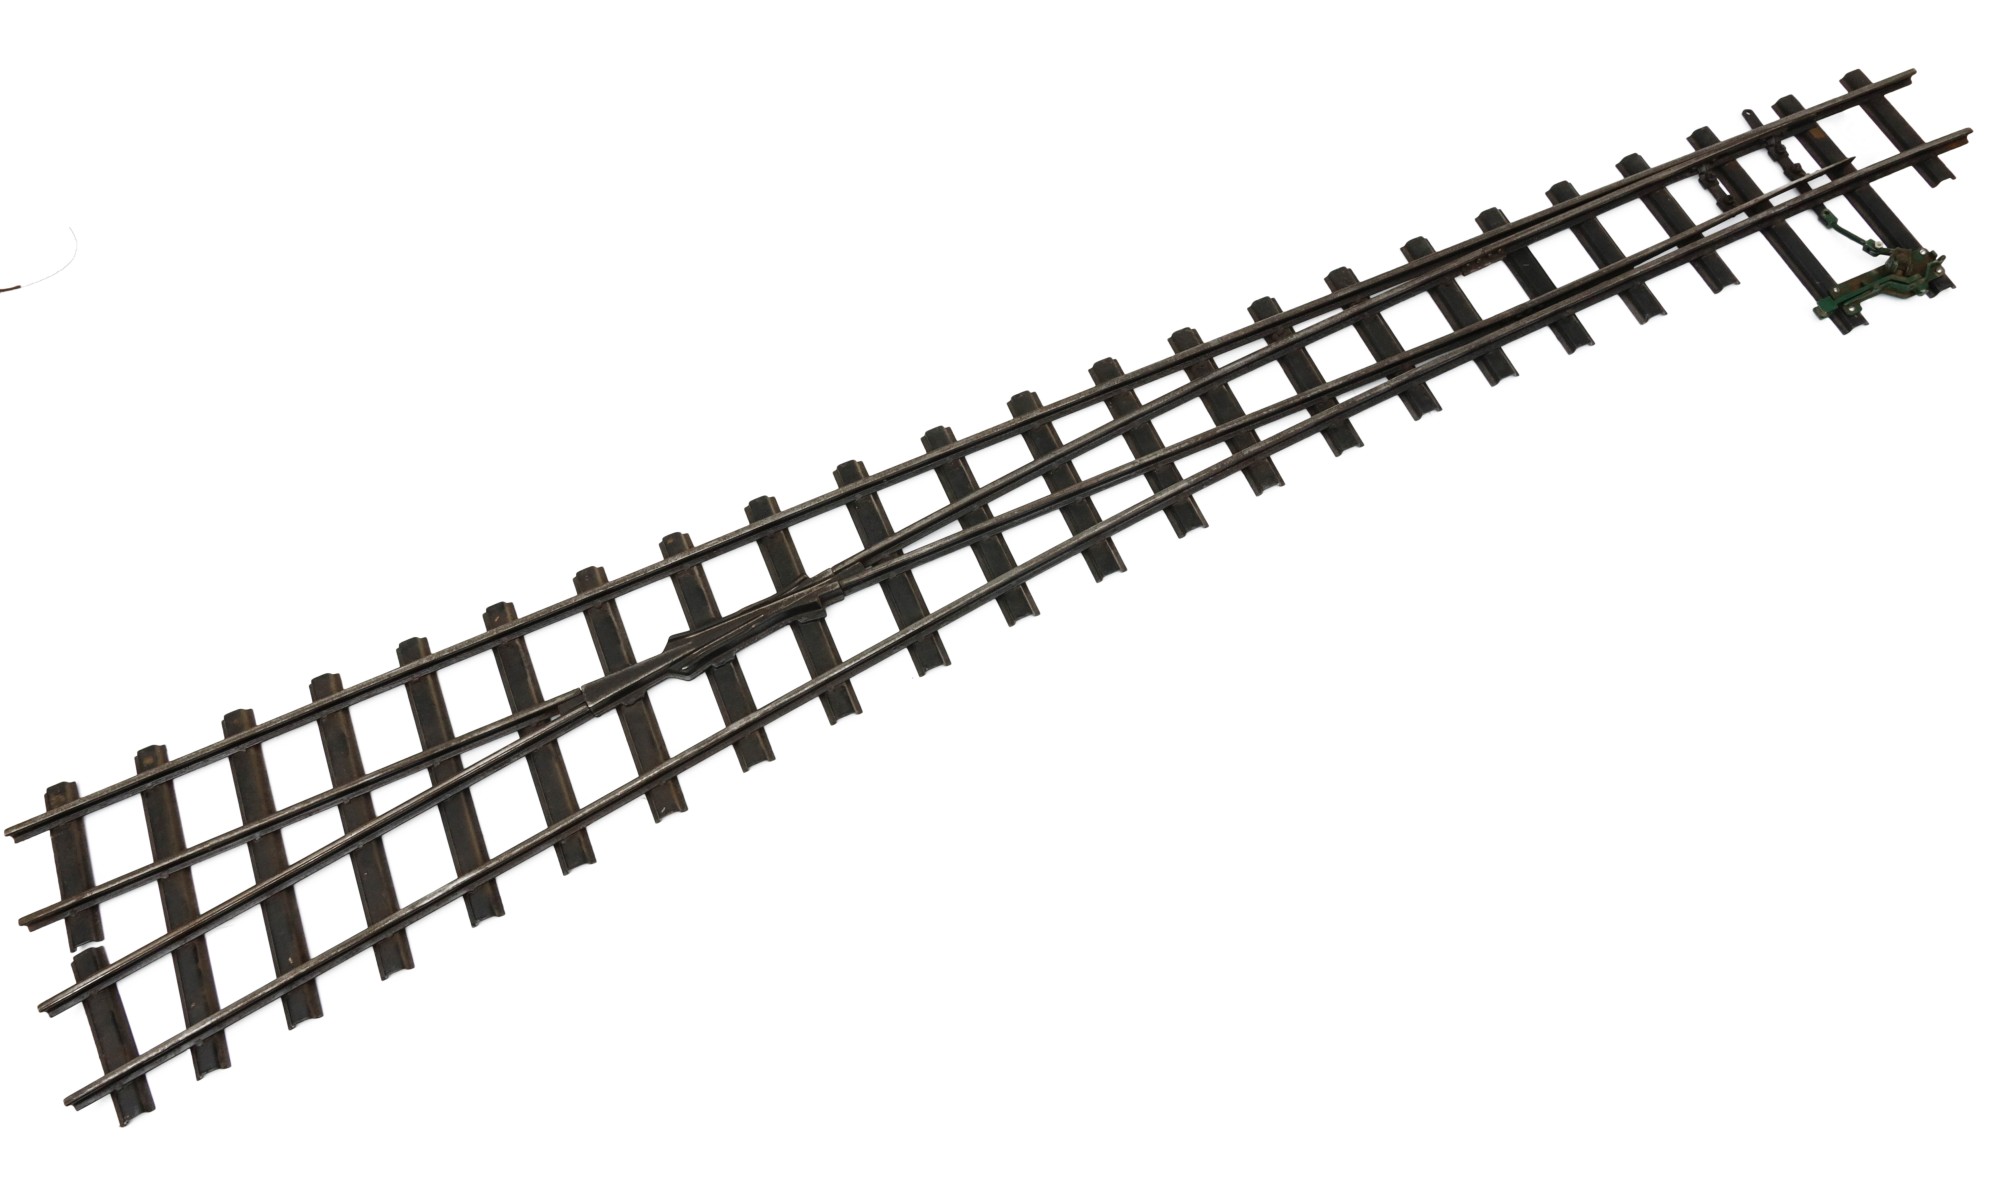 A SECTION OF BUDDY L GARDEN TRAIN TRACK WITH SWITCH